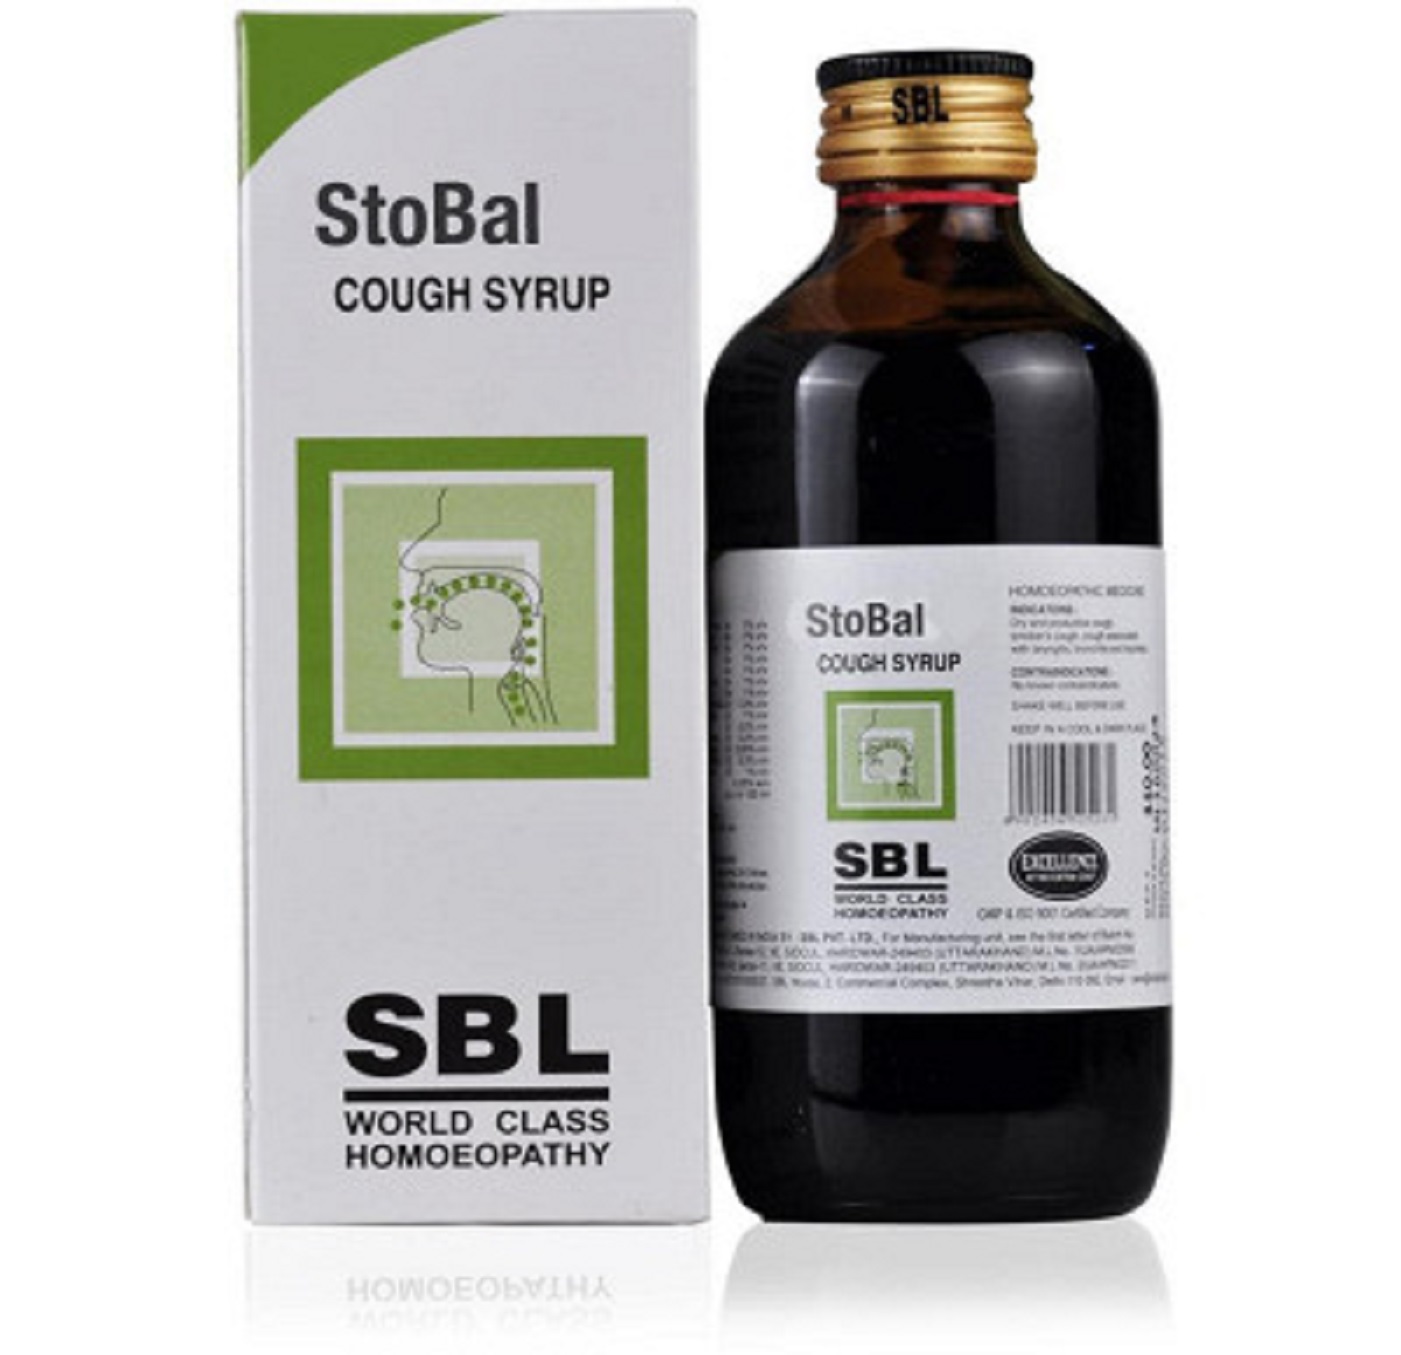 Buy SBL Stobal Cough Syrup Homeopathic Medicine | Doctor Bhargava